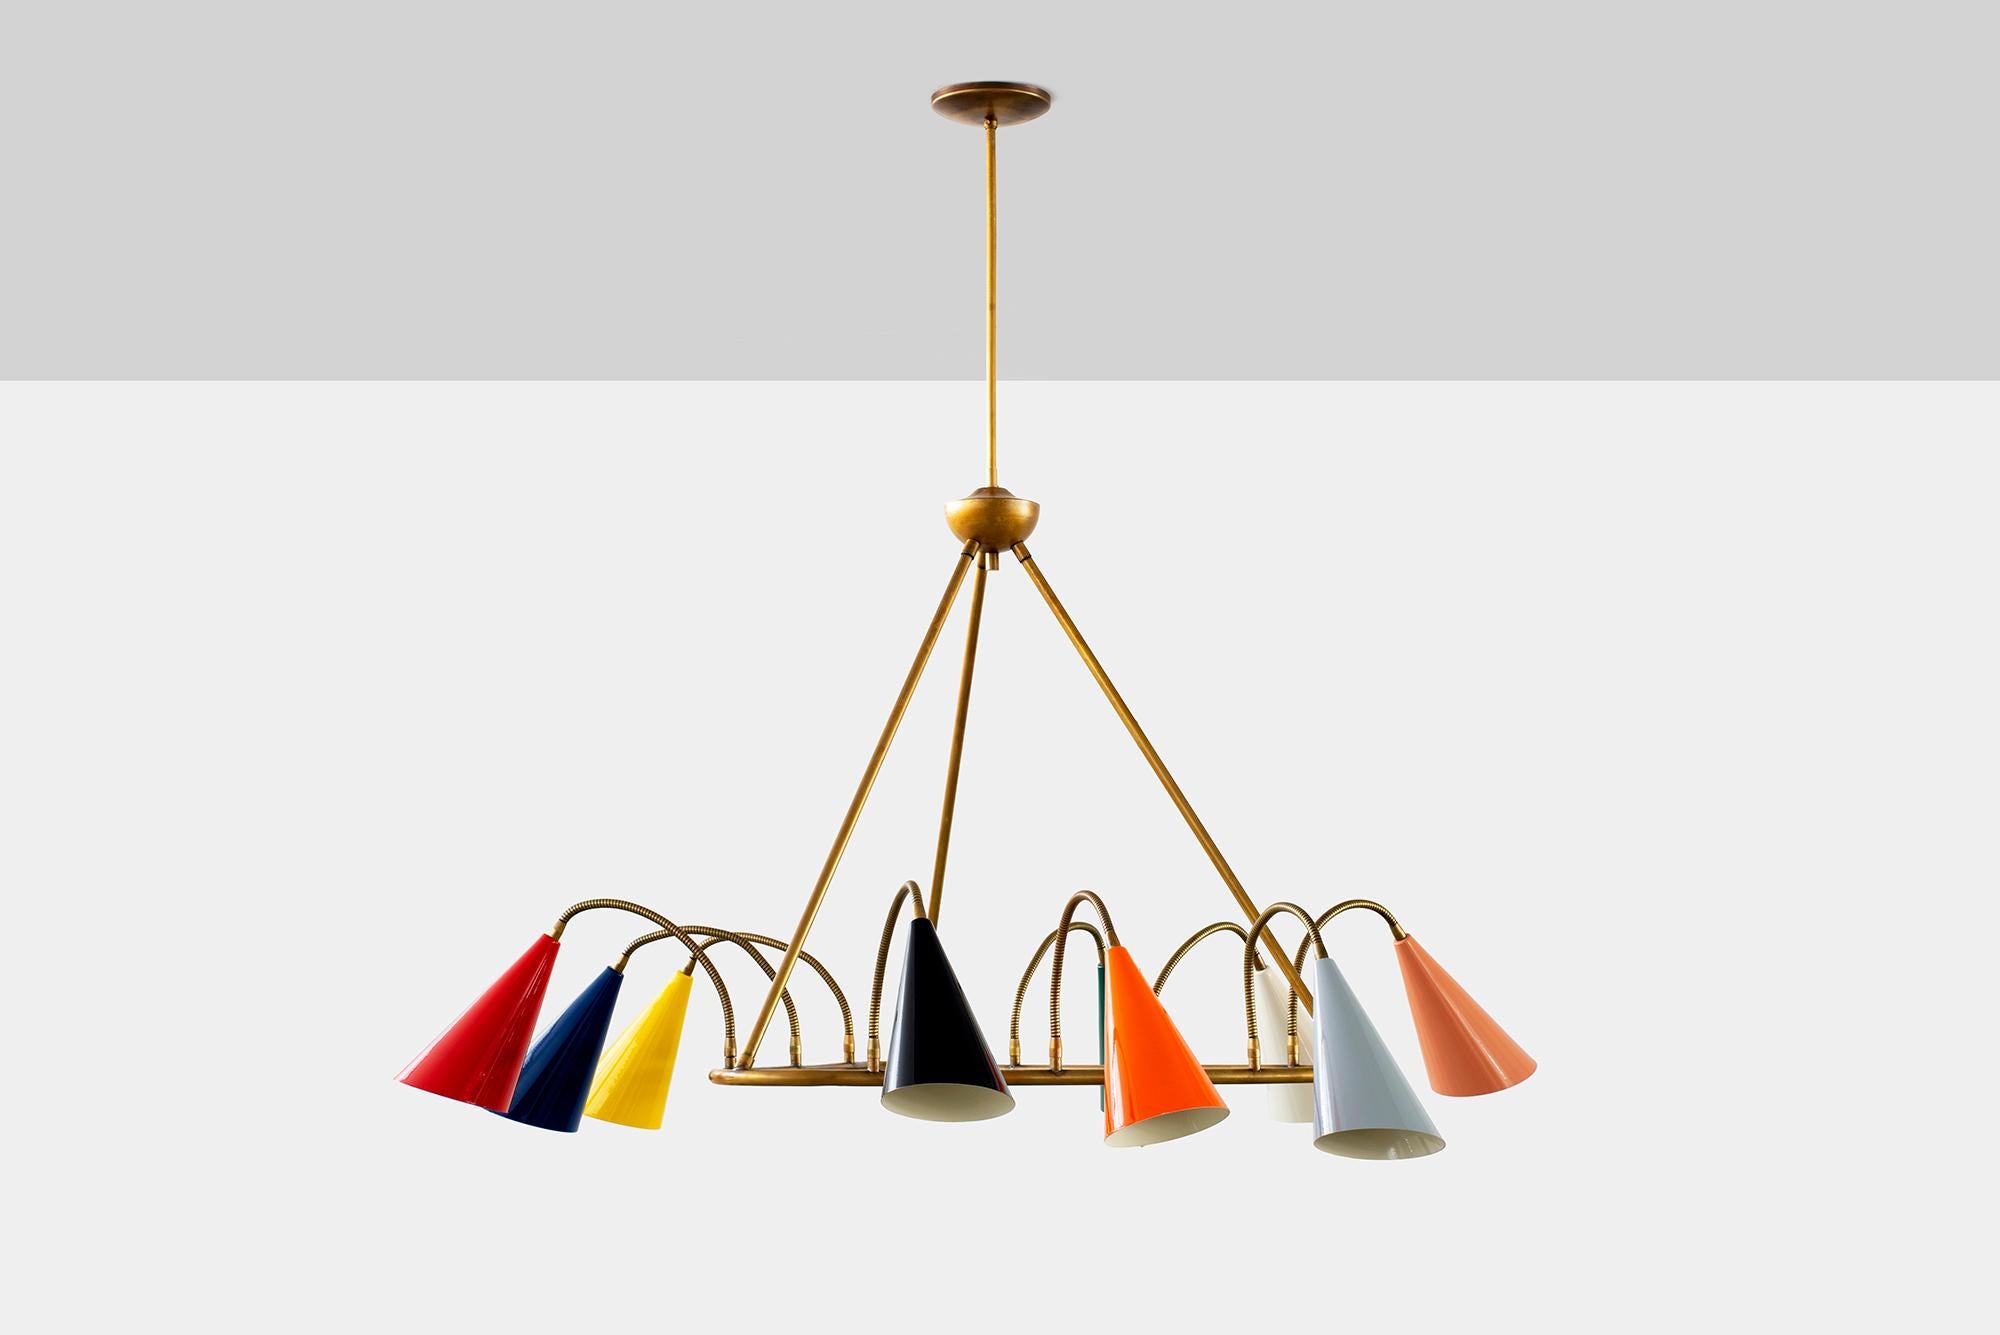 Stilnovo style pendant with nine multicolored cones on adjustable brass arms.

Newly produced in Italy - 
Colors may vary - photos are examples of color possibilities.